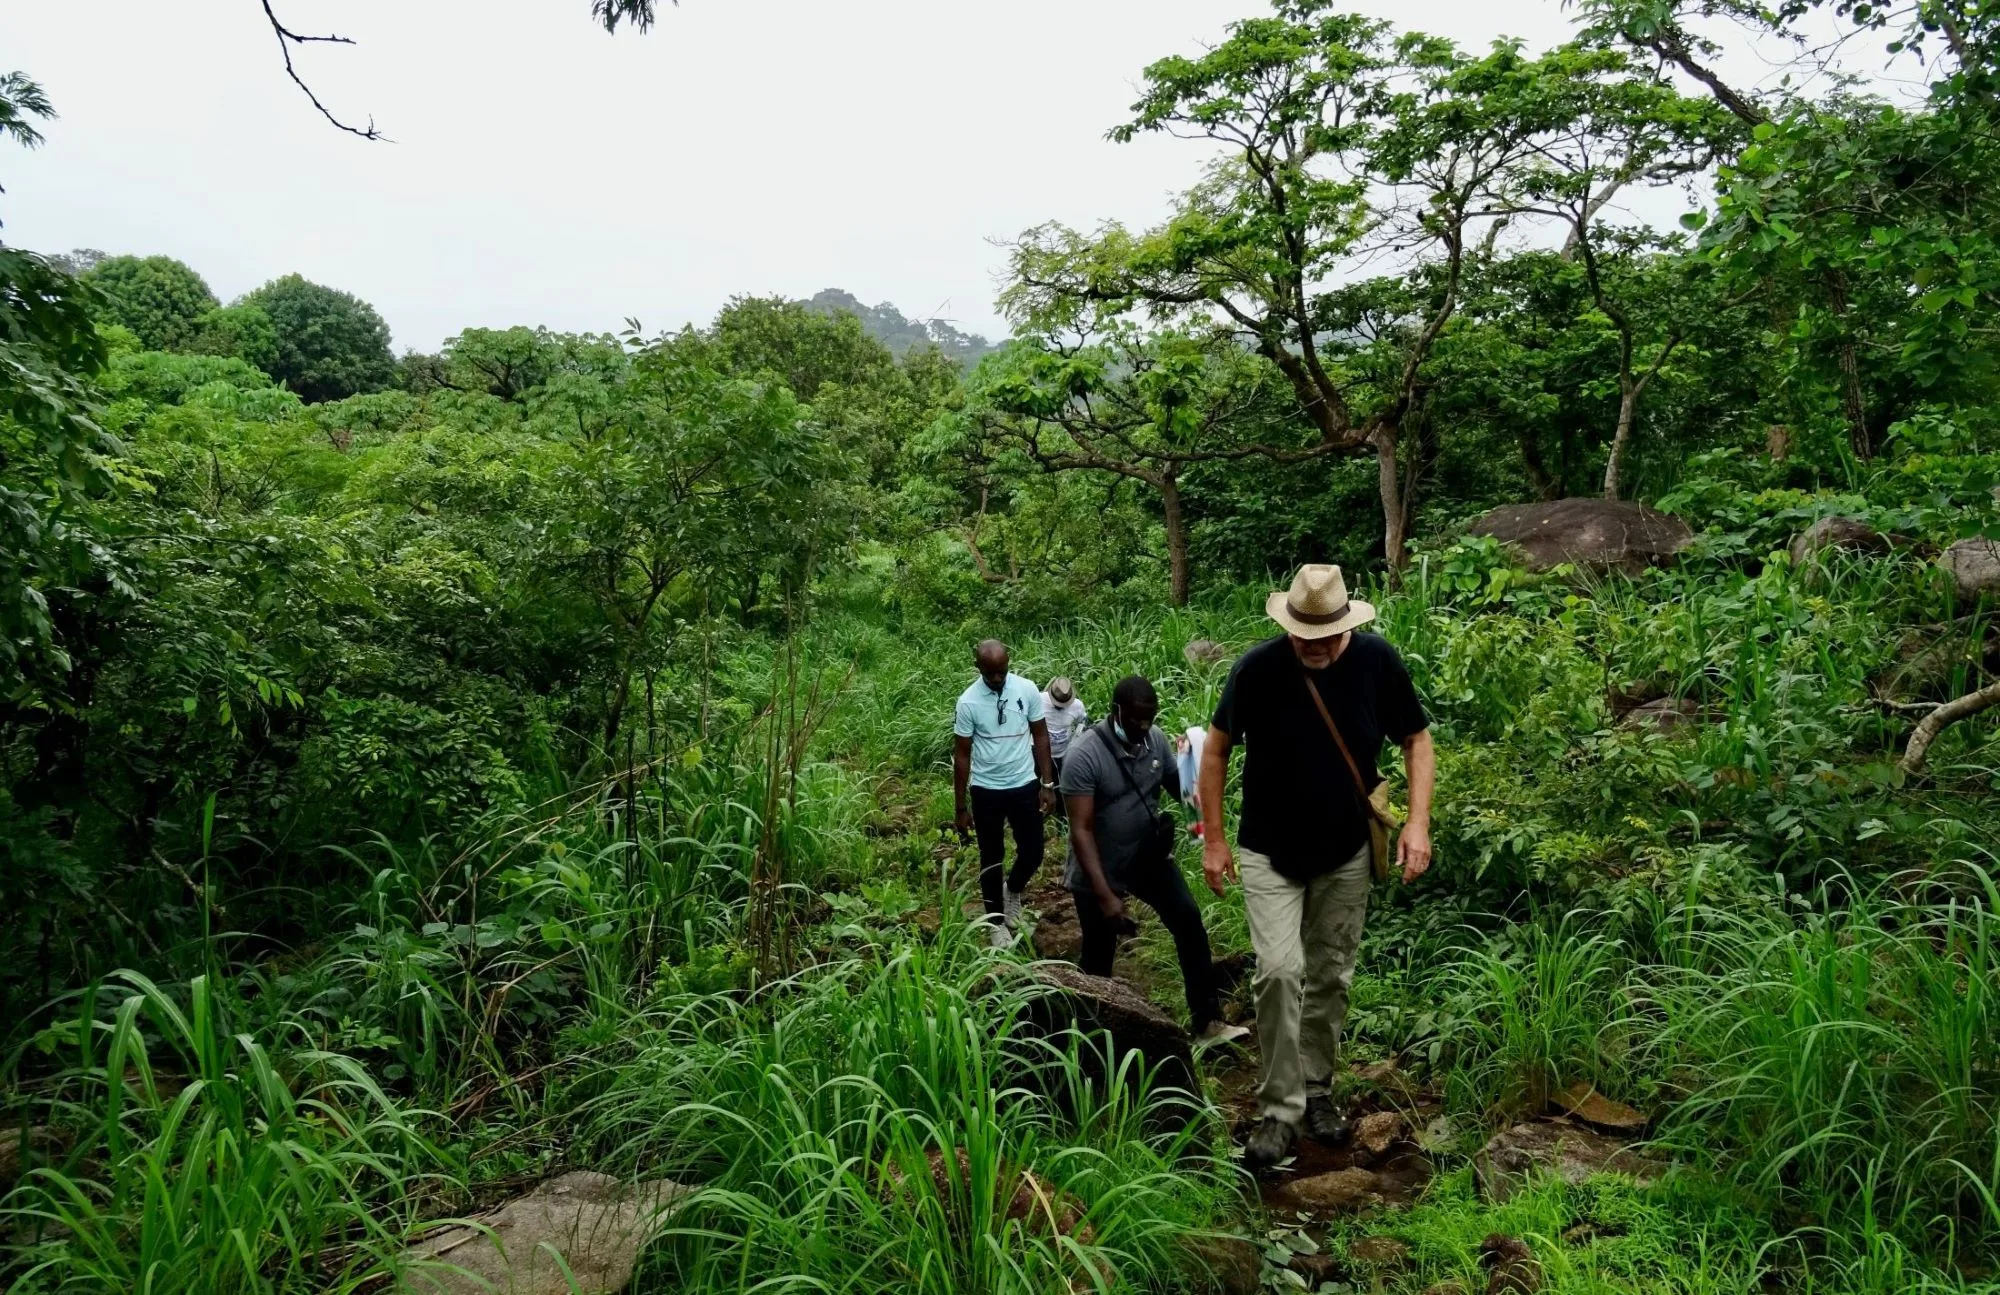 Hiking in the forest in Sierra Leone